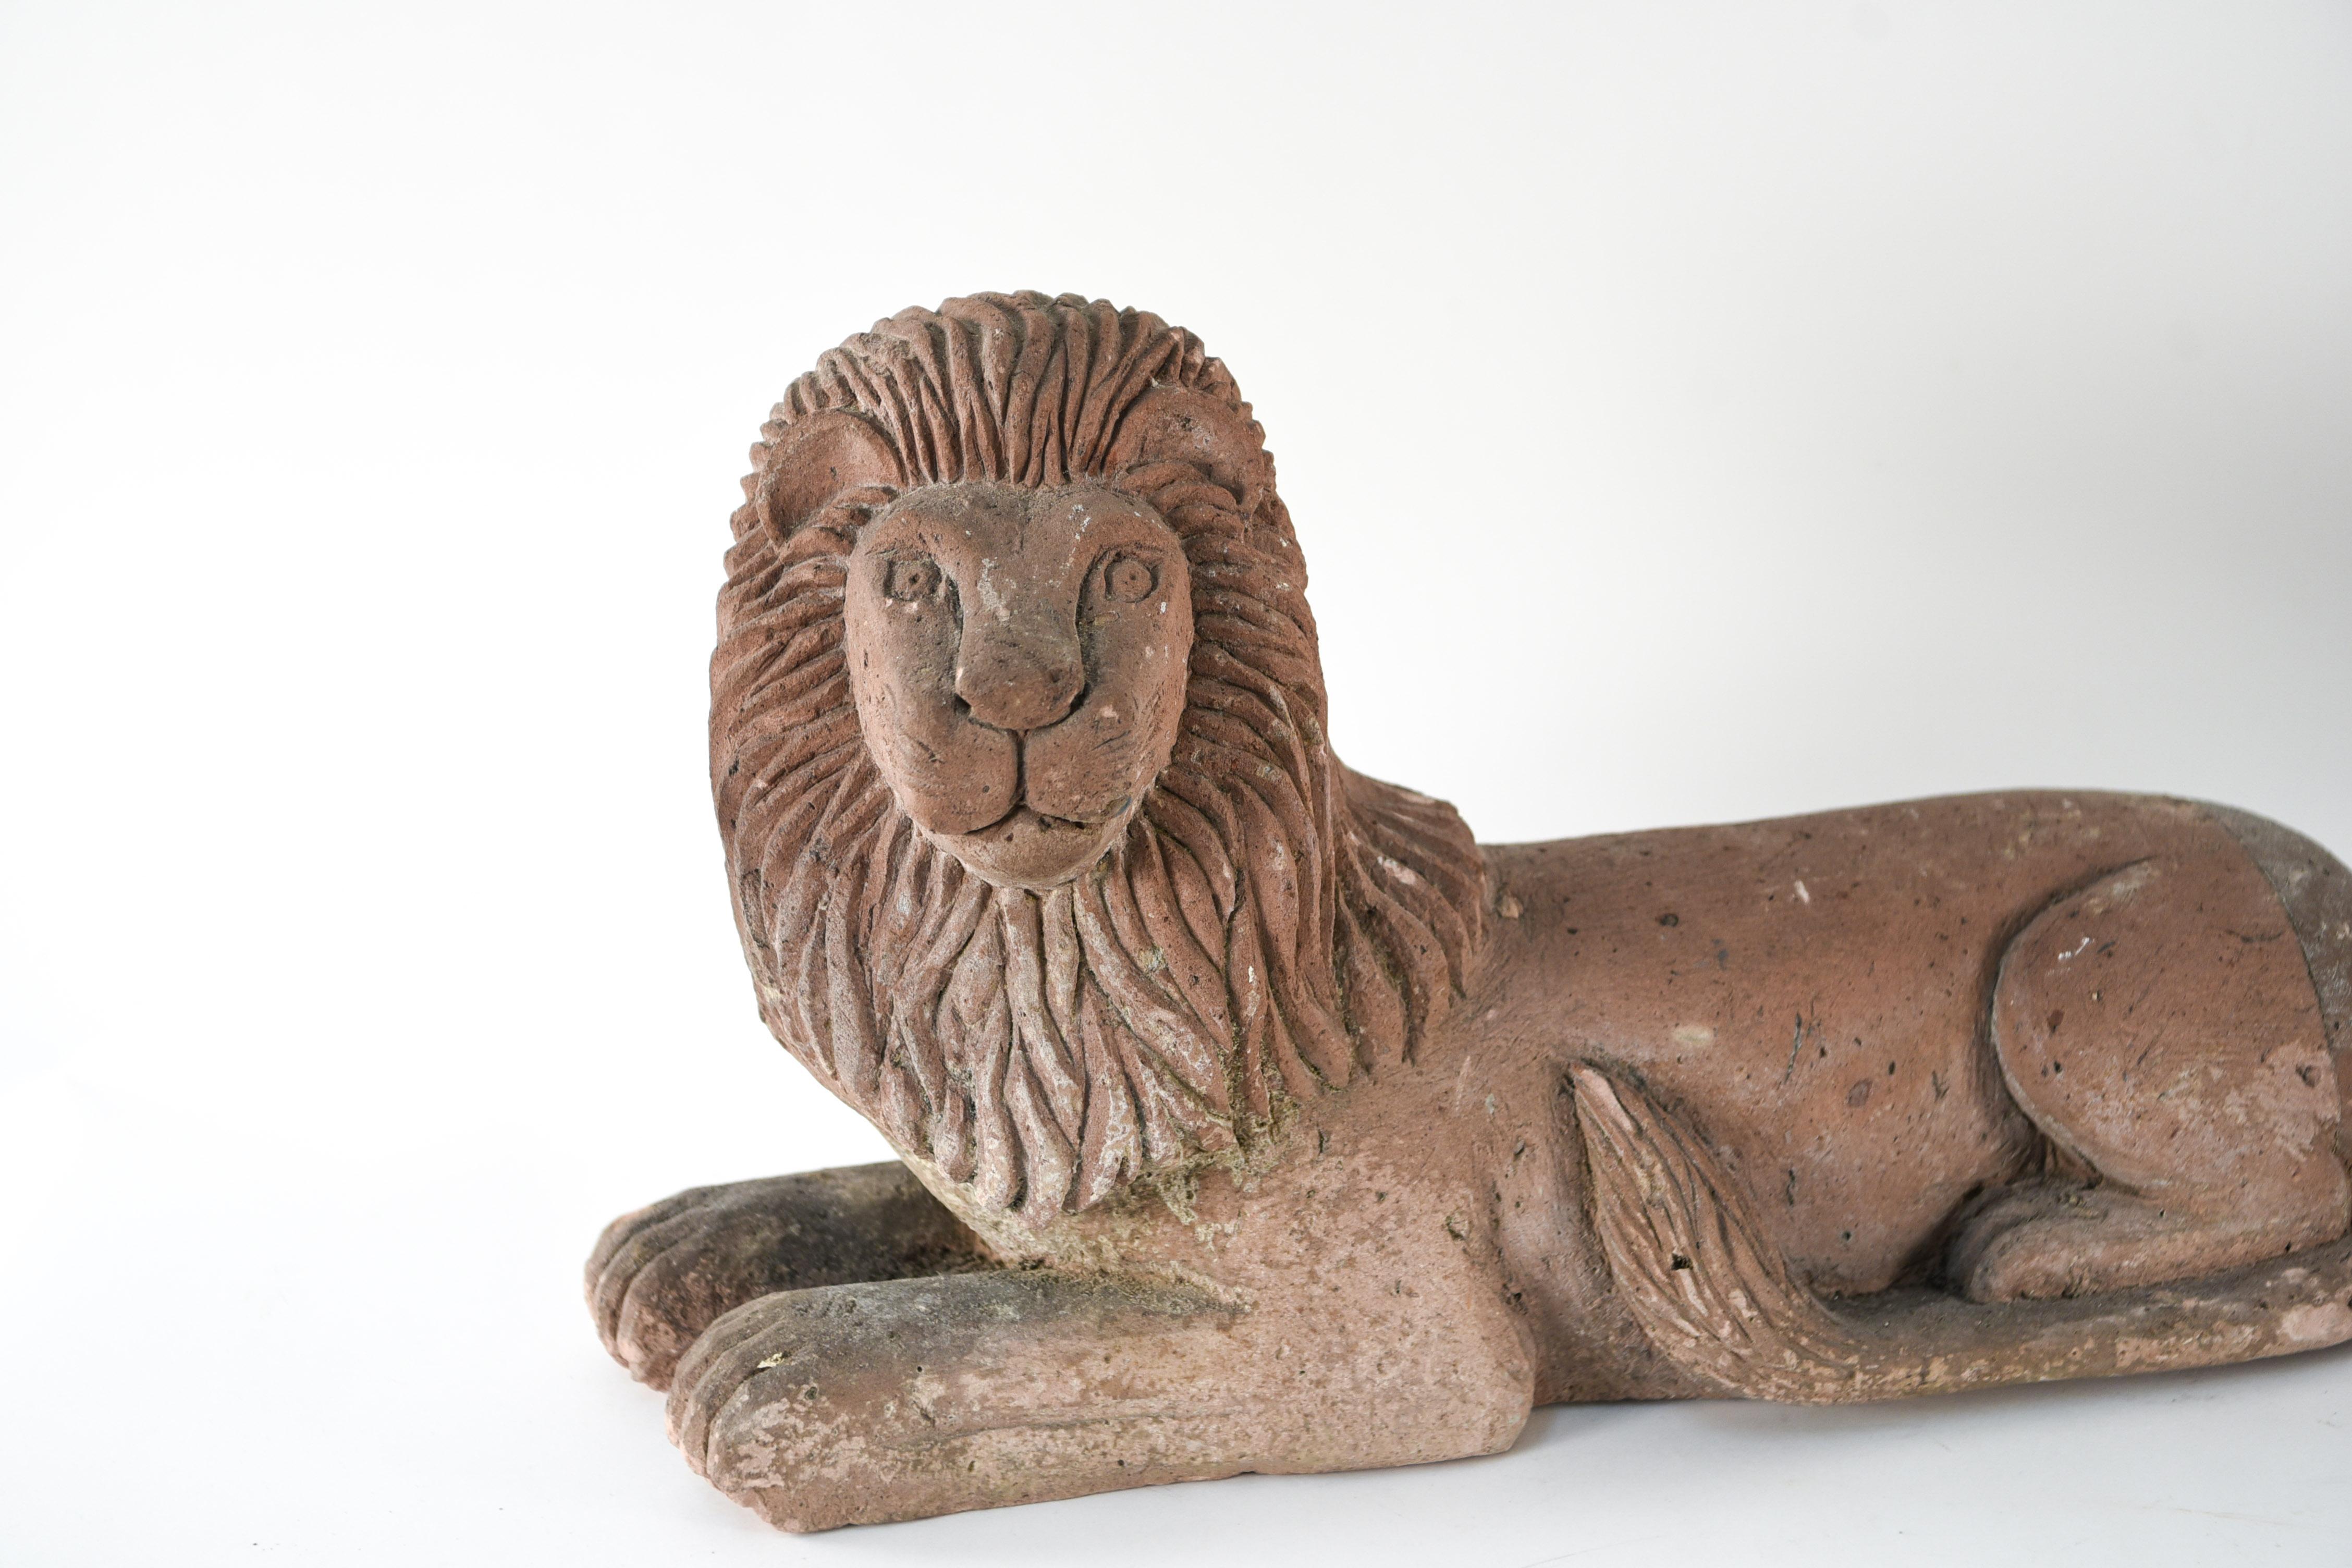 These resolute twin lions feature carved faces, textured coats, and a lovely terracotta color. They make excellent guardians of the garden or front stoop!